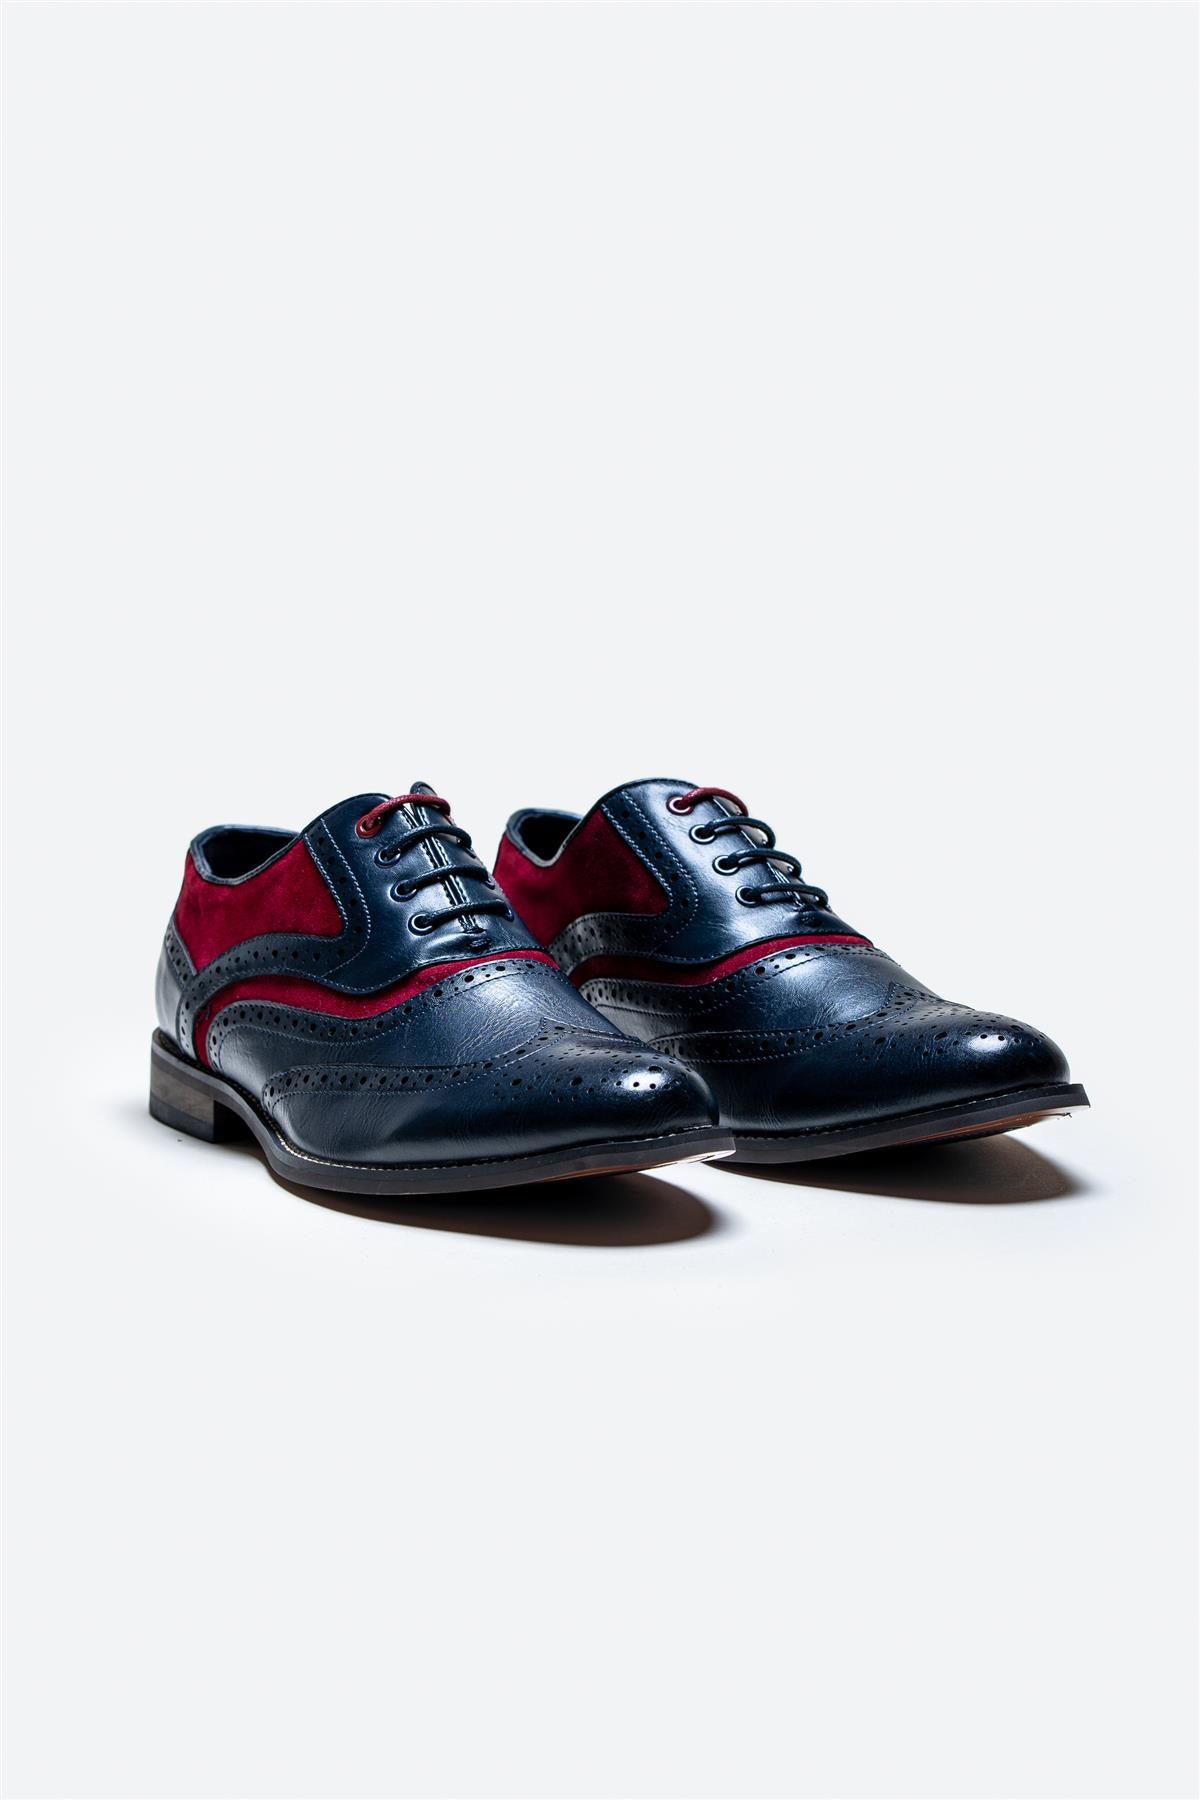 Russel navy/red shoe front